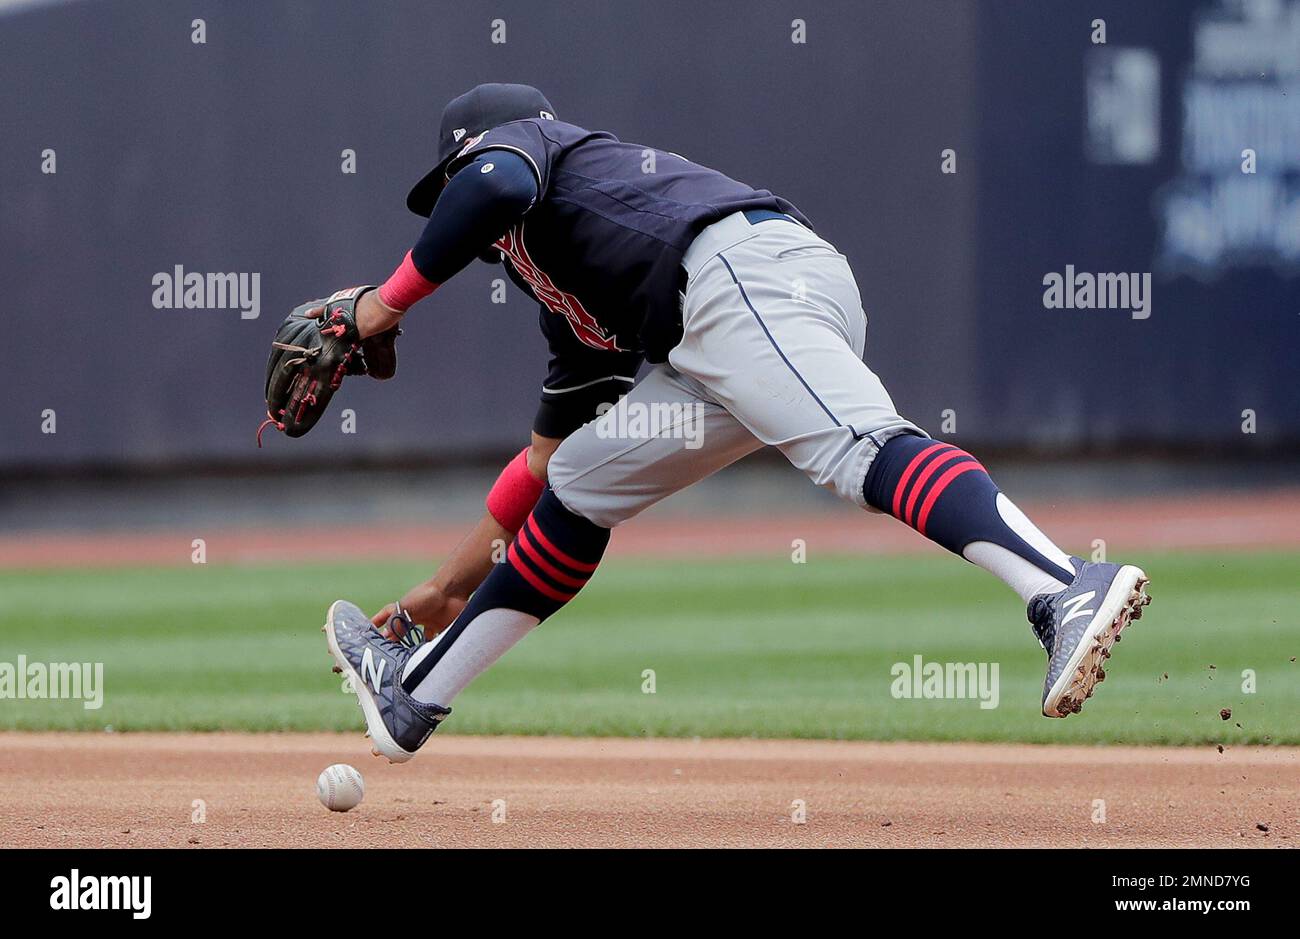 Cleveland Indians shortstop Francisco Lindor commits a fielding error on a  ground ball by New York Yankees' Ronald Torreyes with the bases loaded  during the fifth inning of a baseball game allowing